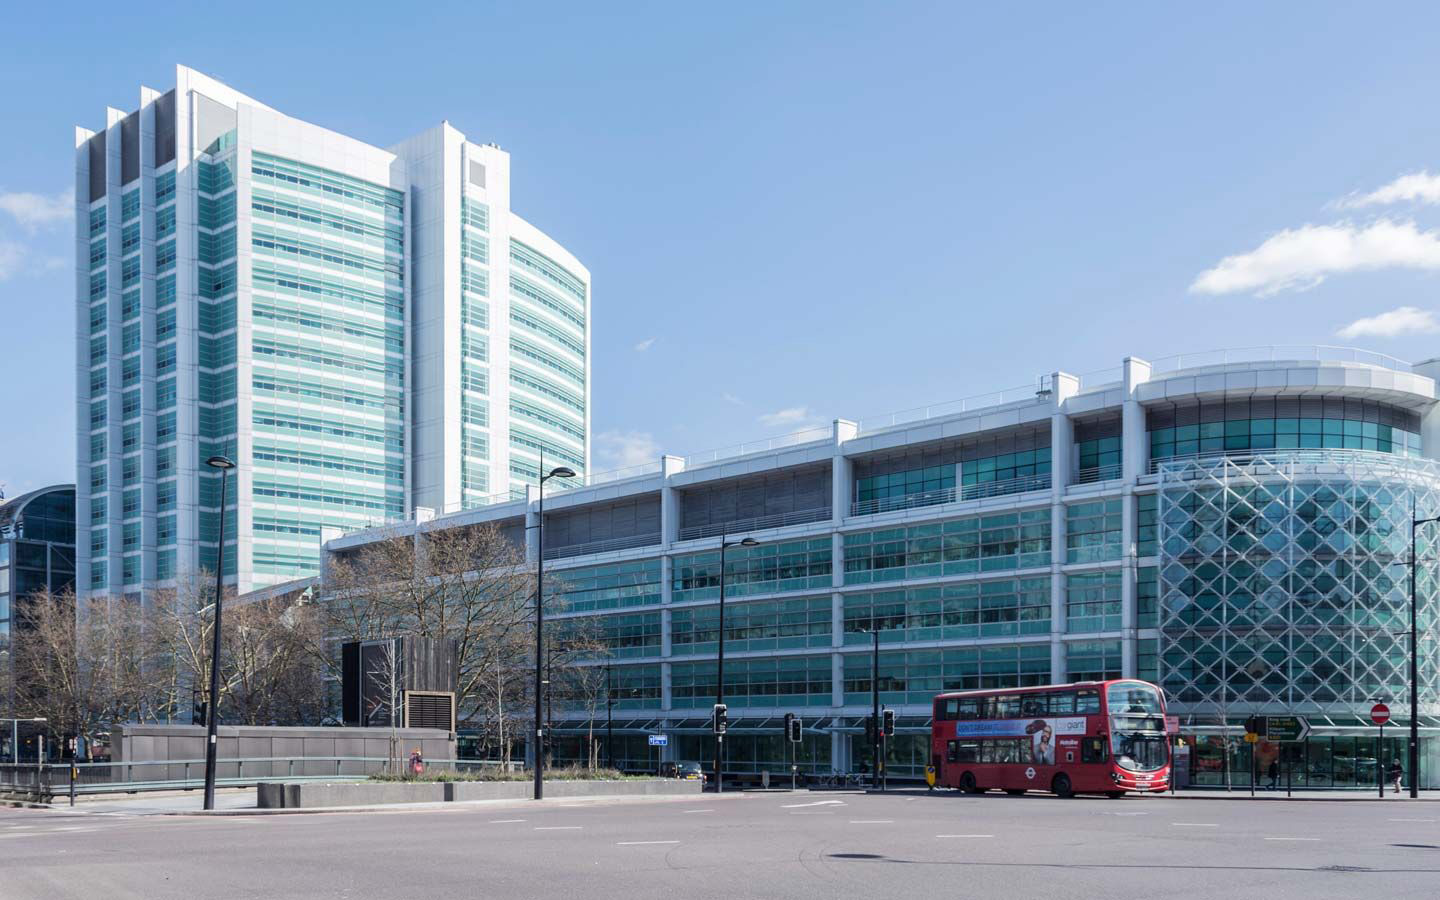 external picture of University College Hospital with a red double decker bus 